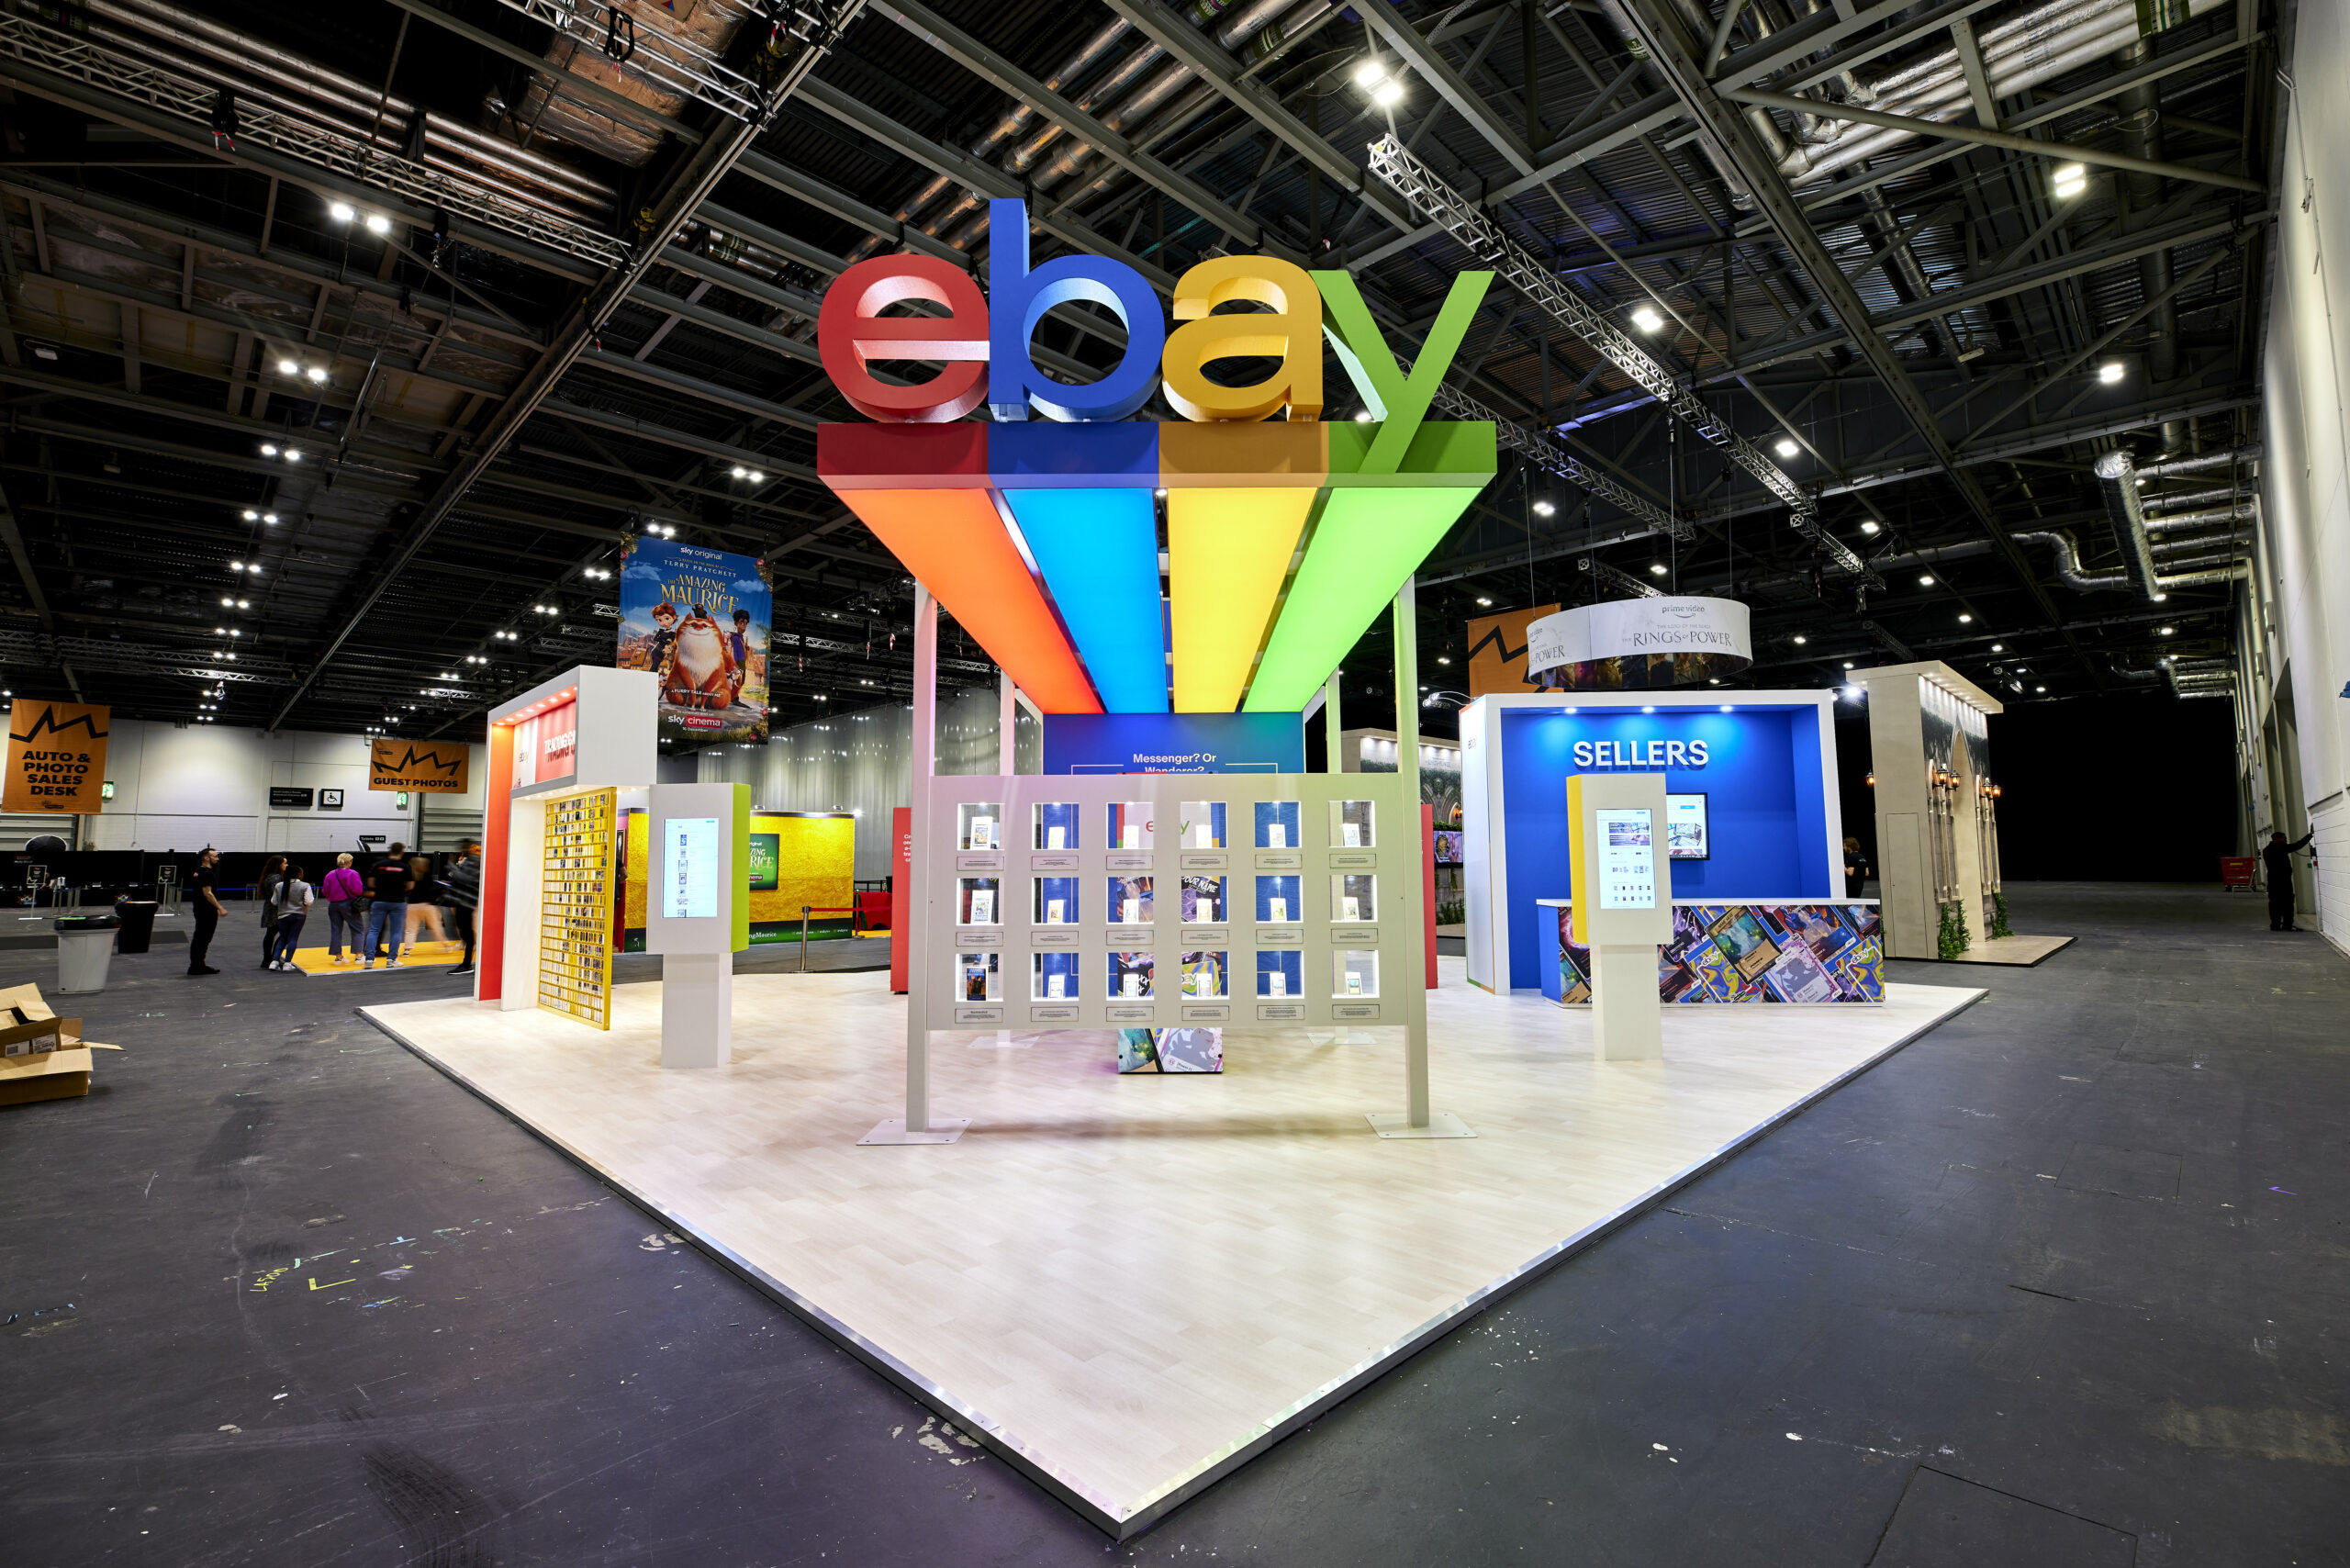 eBay – Uncover Your Story